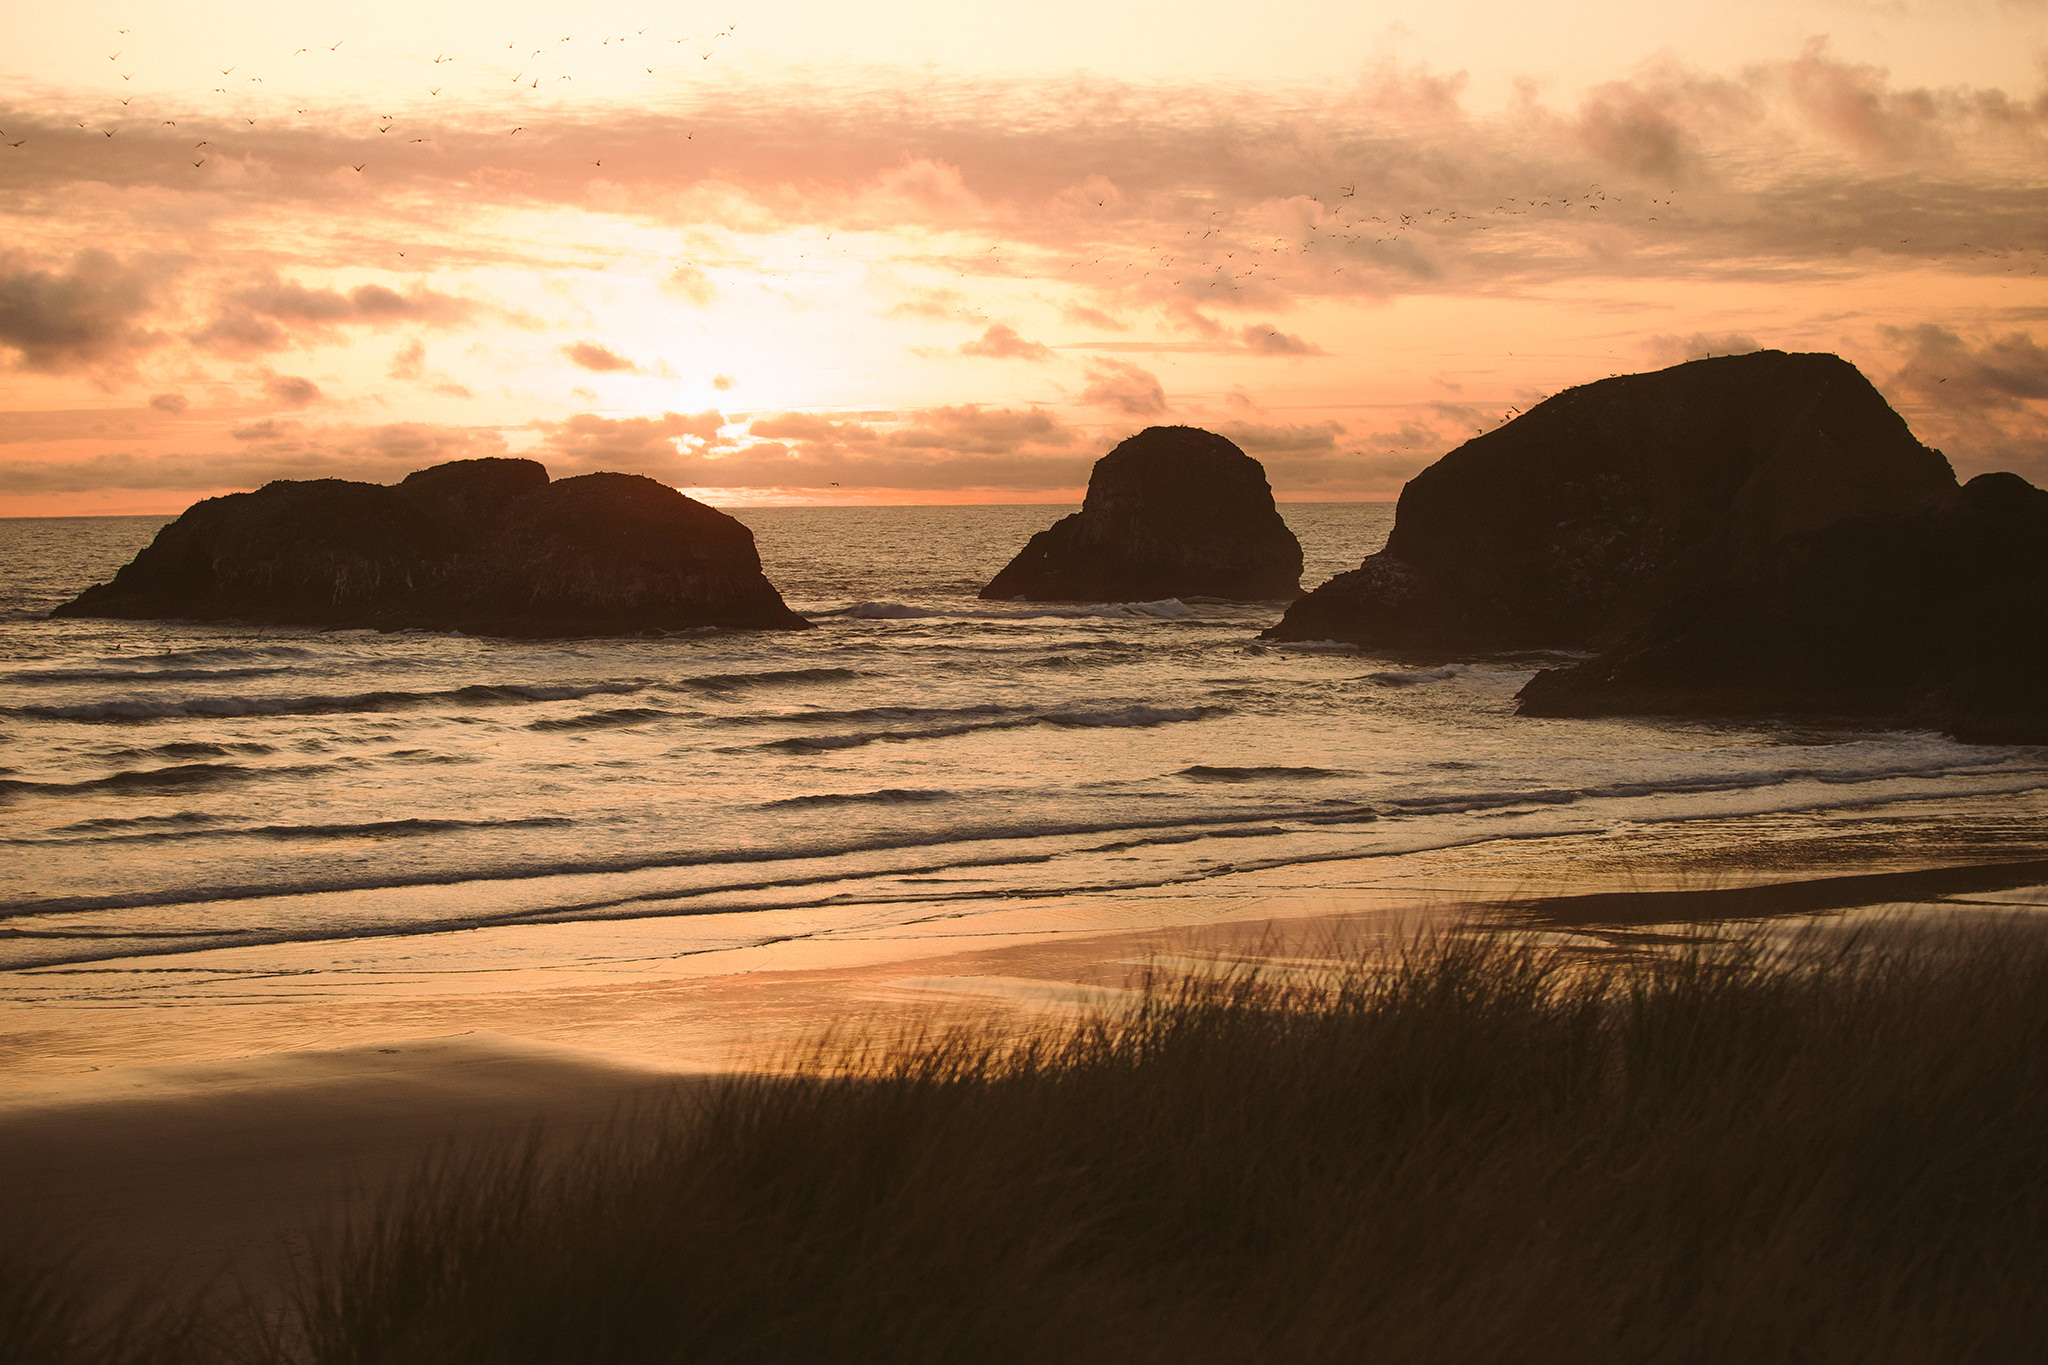 The sunset over Cannon Beach